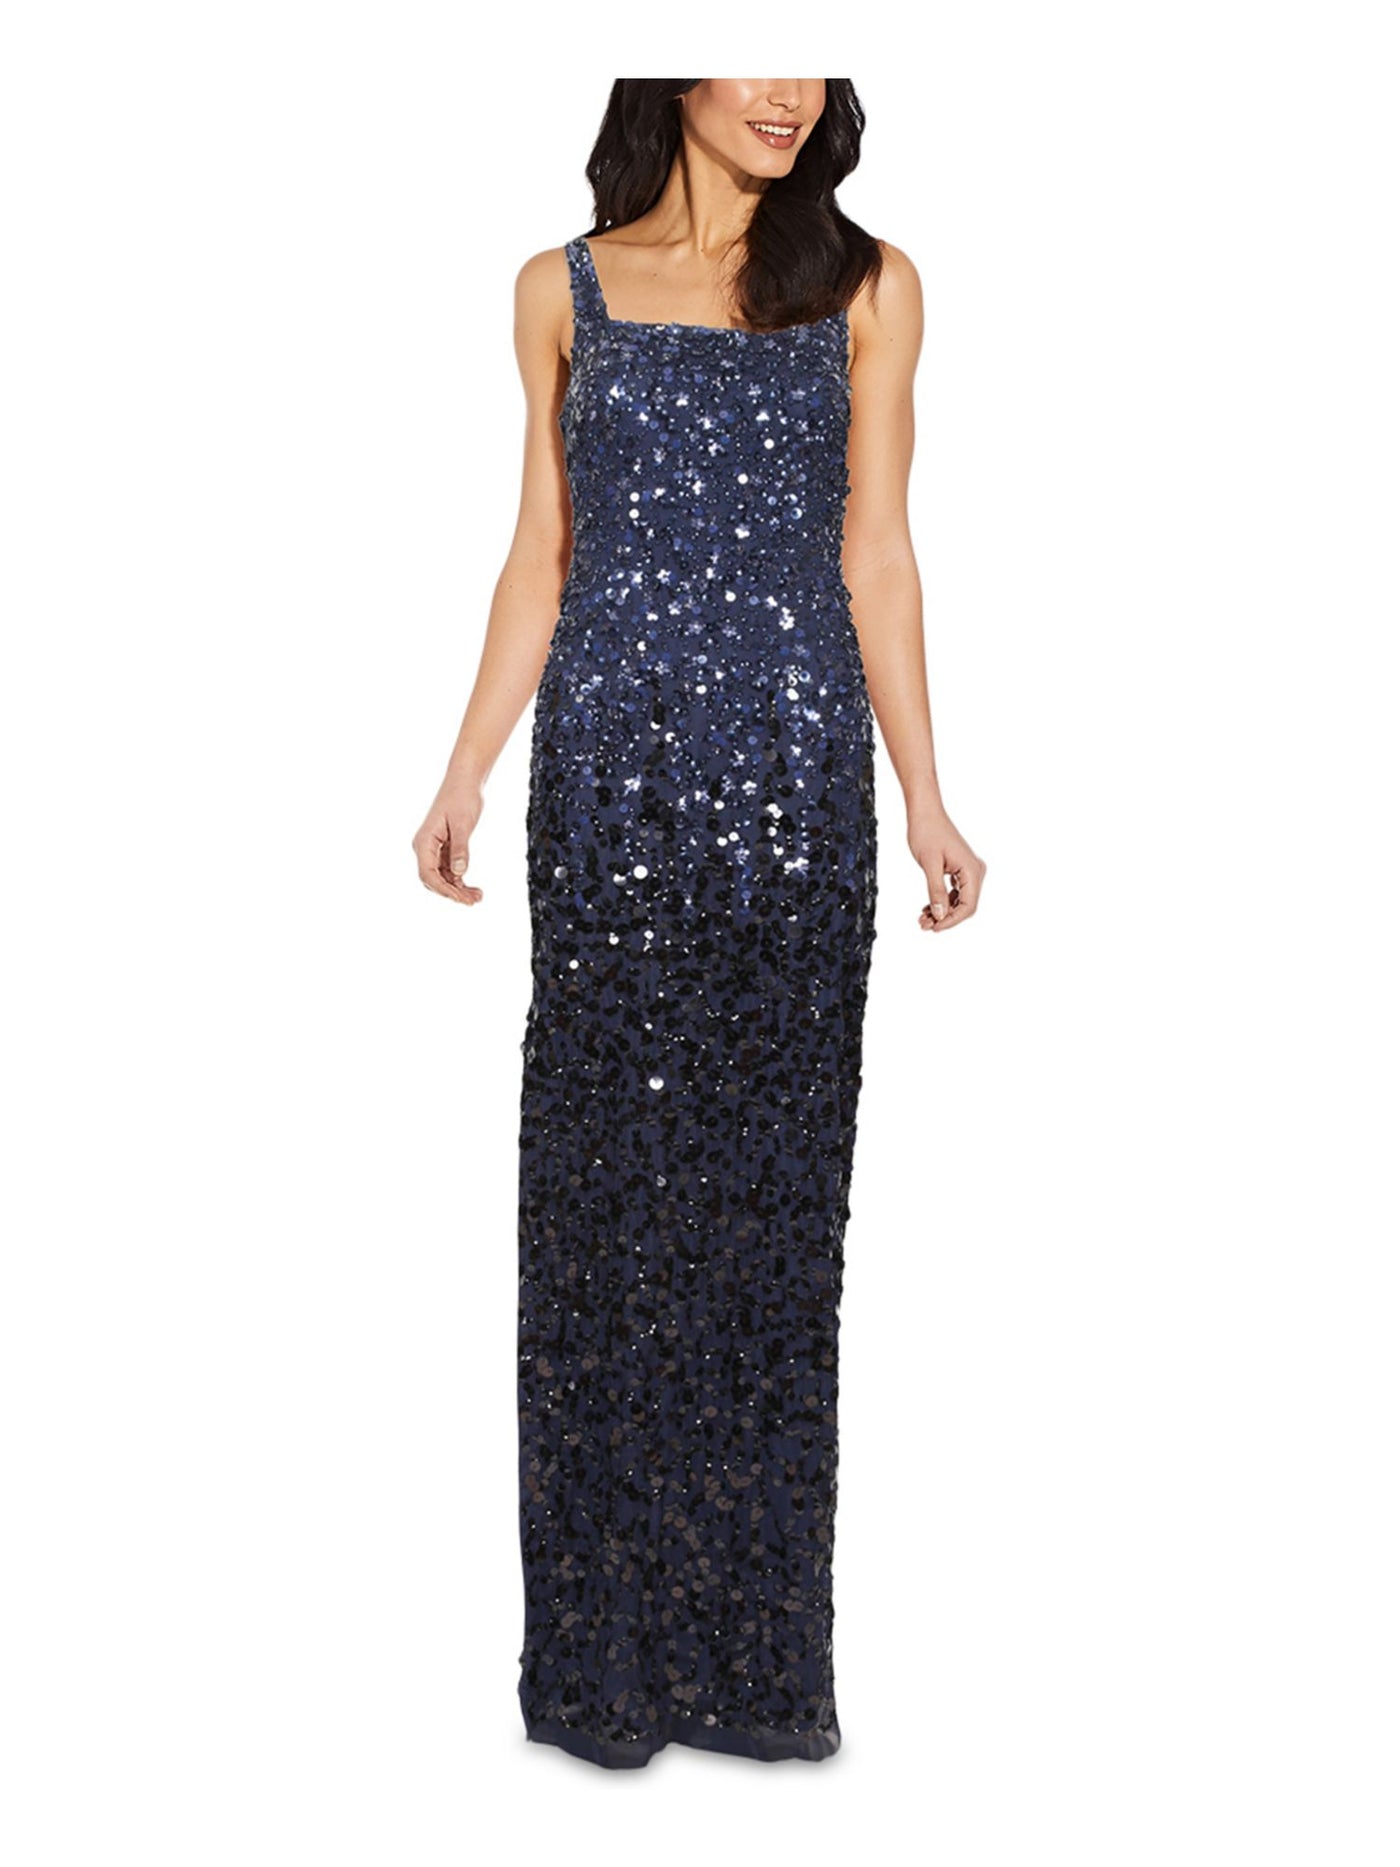 ADRIANNA PAPELL Womens Navy Stretch Sequined Zippered Slitted Lined Sleeveless Square Neck Full-Length Formal Gown Dress 10